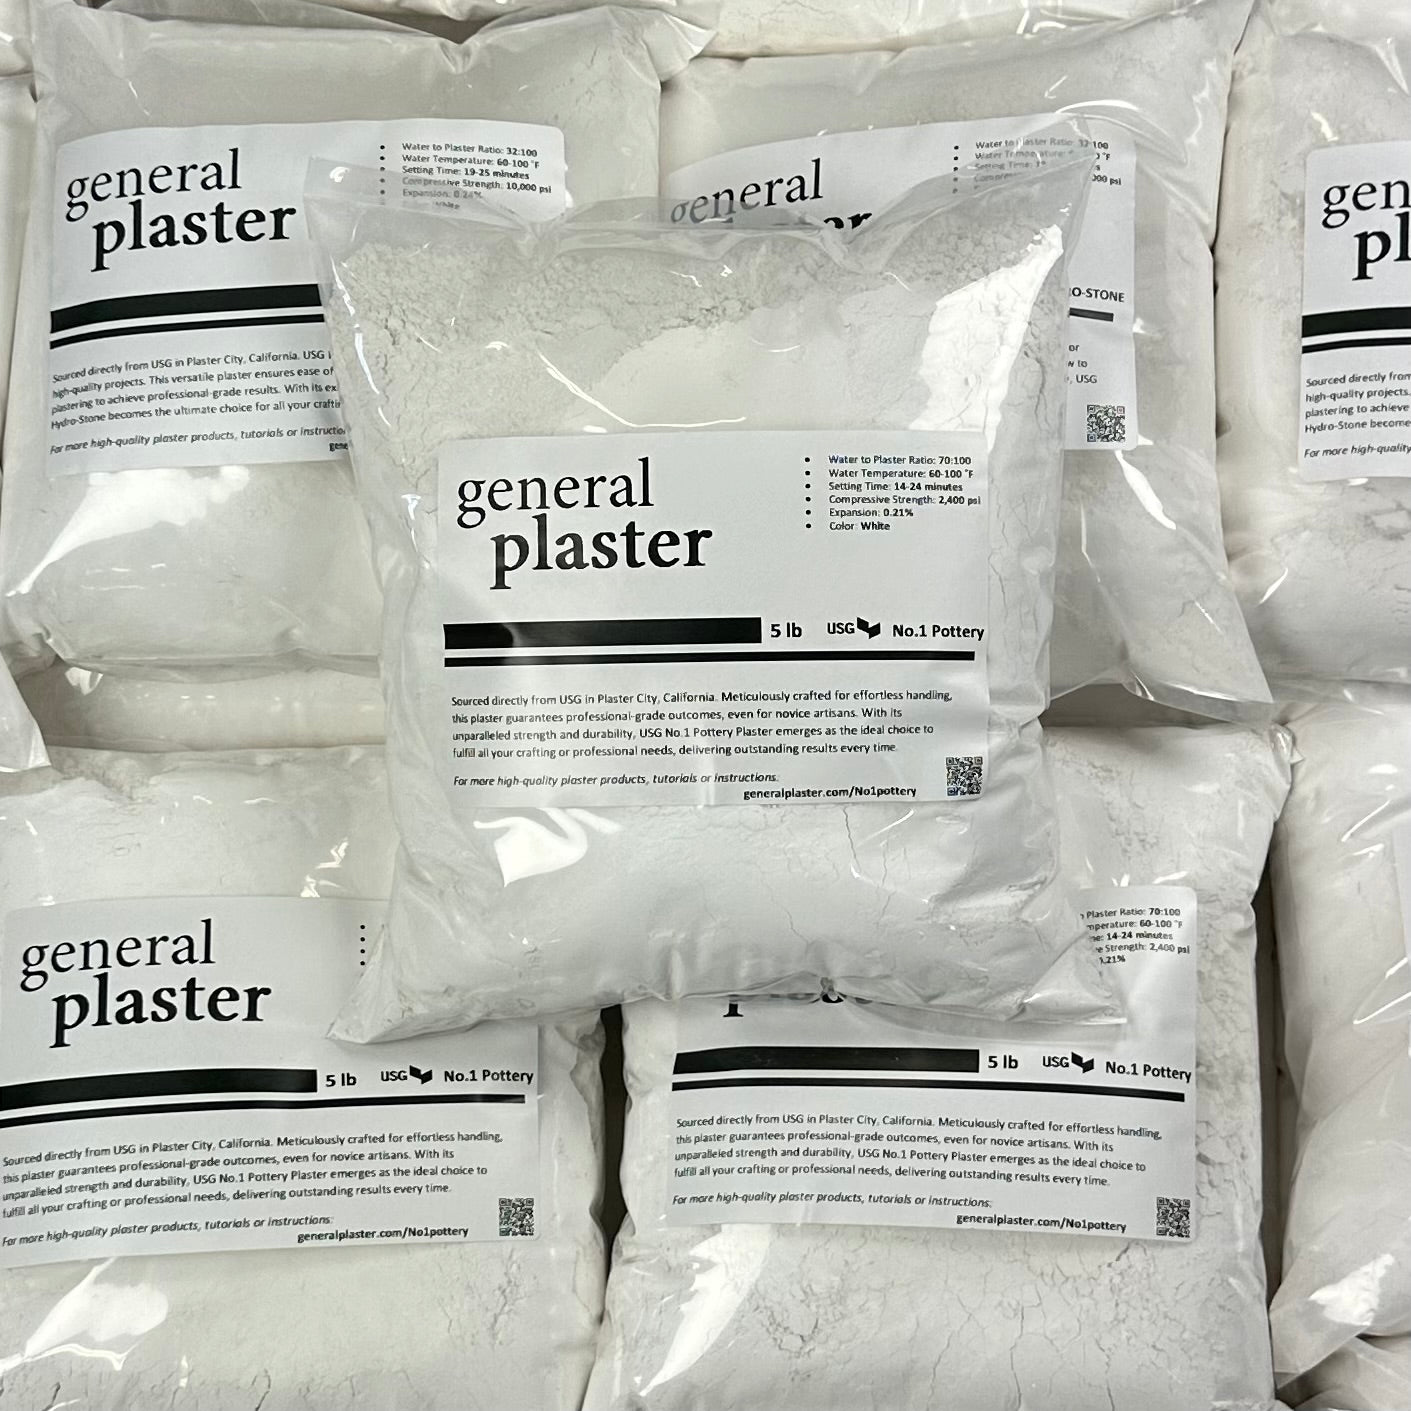 USG No. 1 Pottery Plaster - Sanitary Ware and General Casting